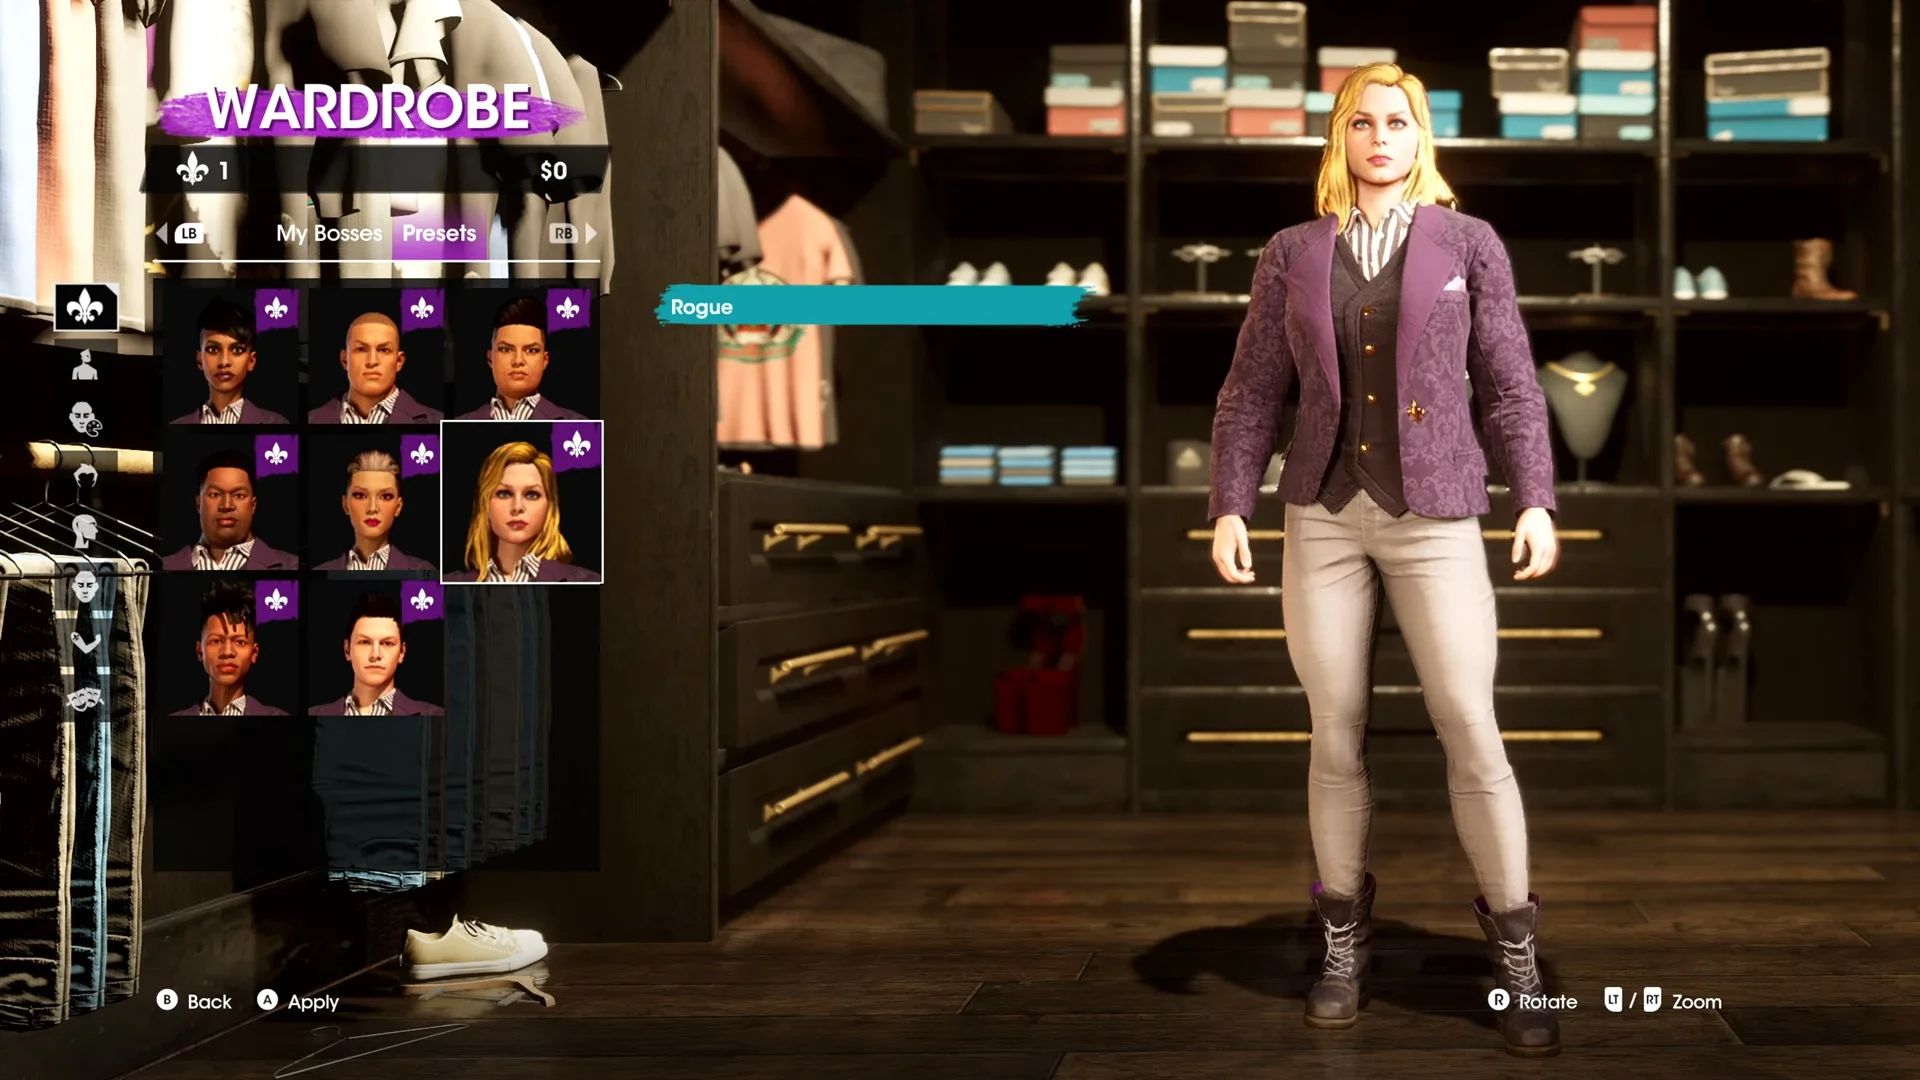 Saints Row 2022 isn't the Saints Row you remember – and that's fine